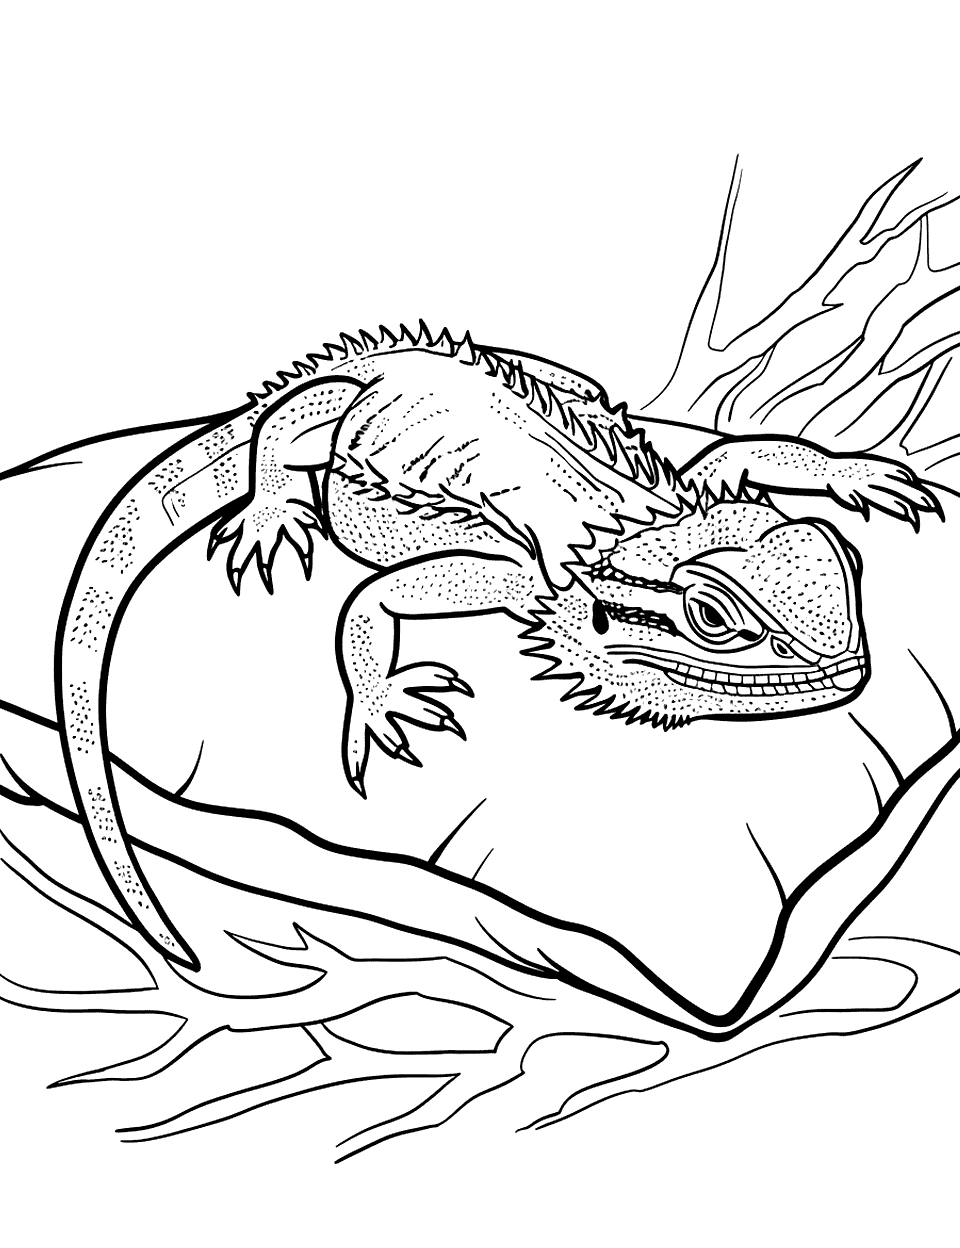 Sleepy Bearded Dragon on a Pillow Lizard Coloring Page - A bearded dragon resting peacefully on a fluffy pillow.